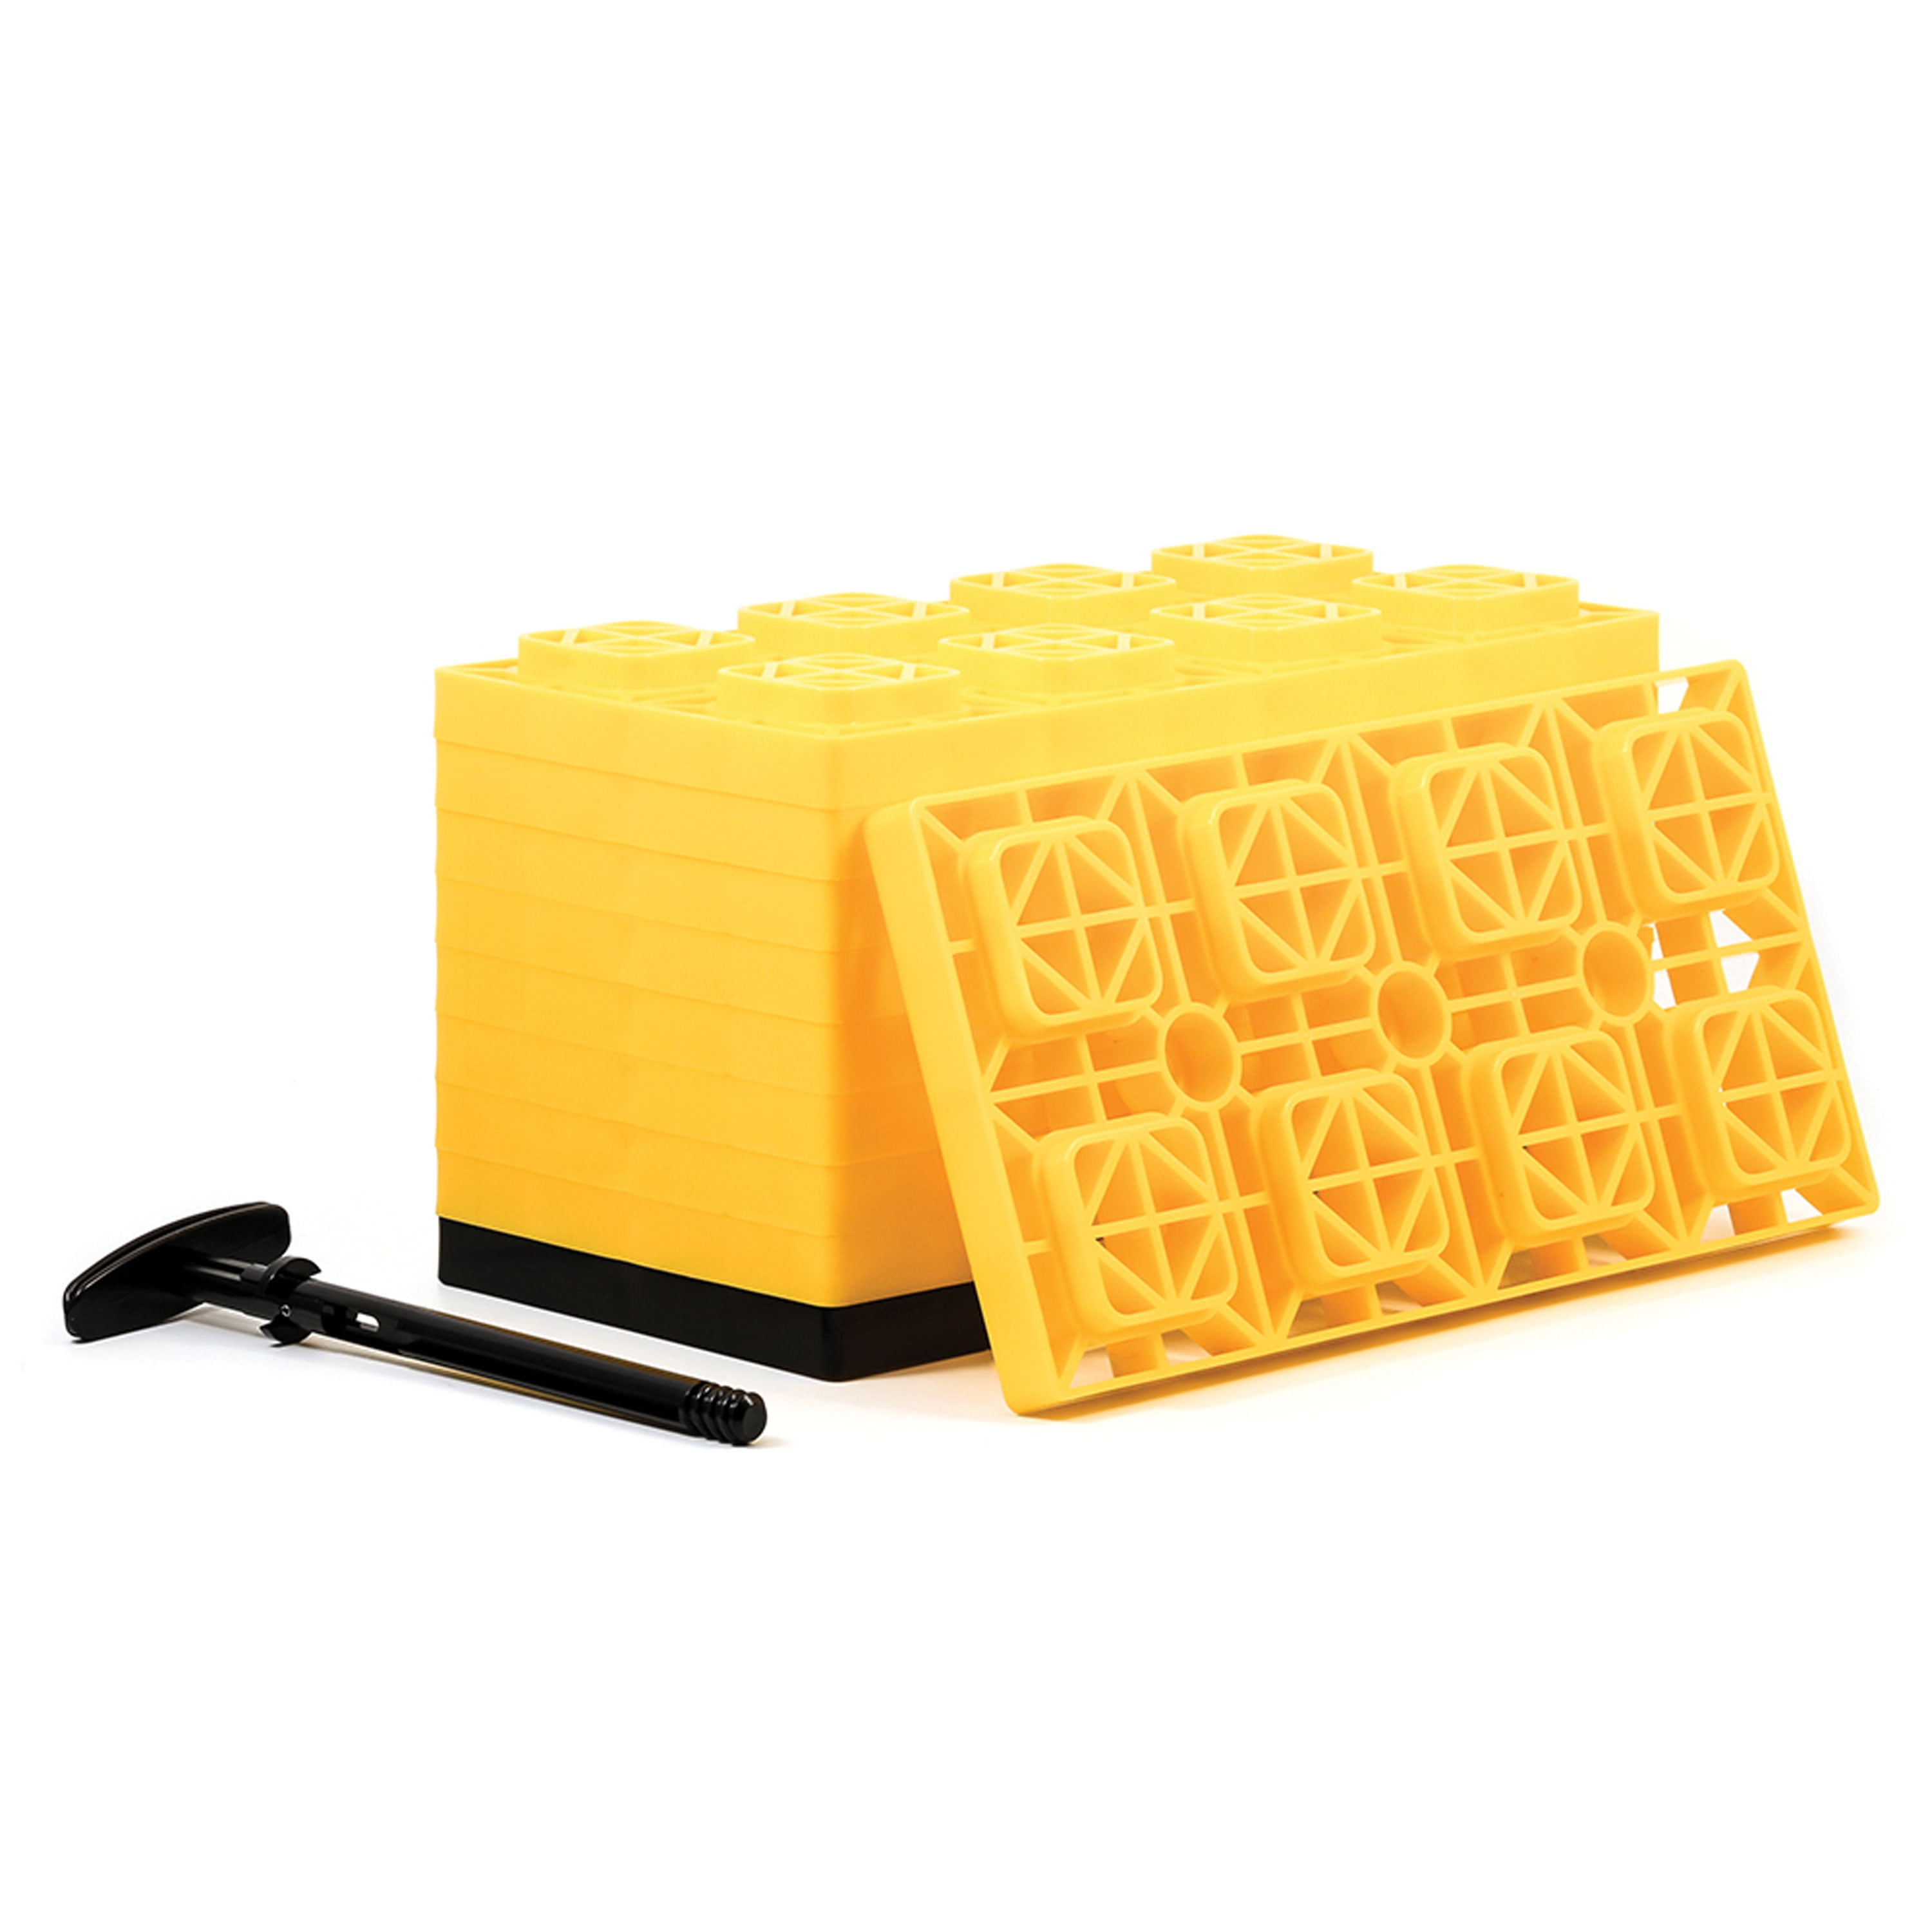 4 Pack Securely Fits on Top of Your Leveling Blocks to Create An Even Surface Without Increasing Stack Height Camco Durable Leveling Block Caps 44500